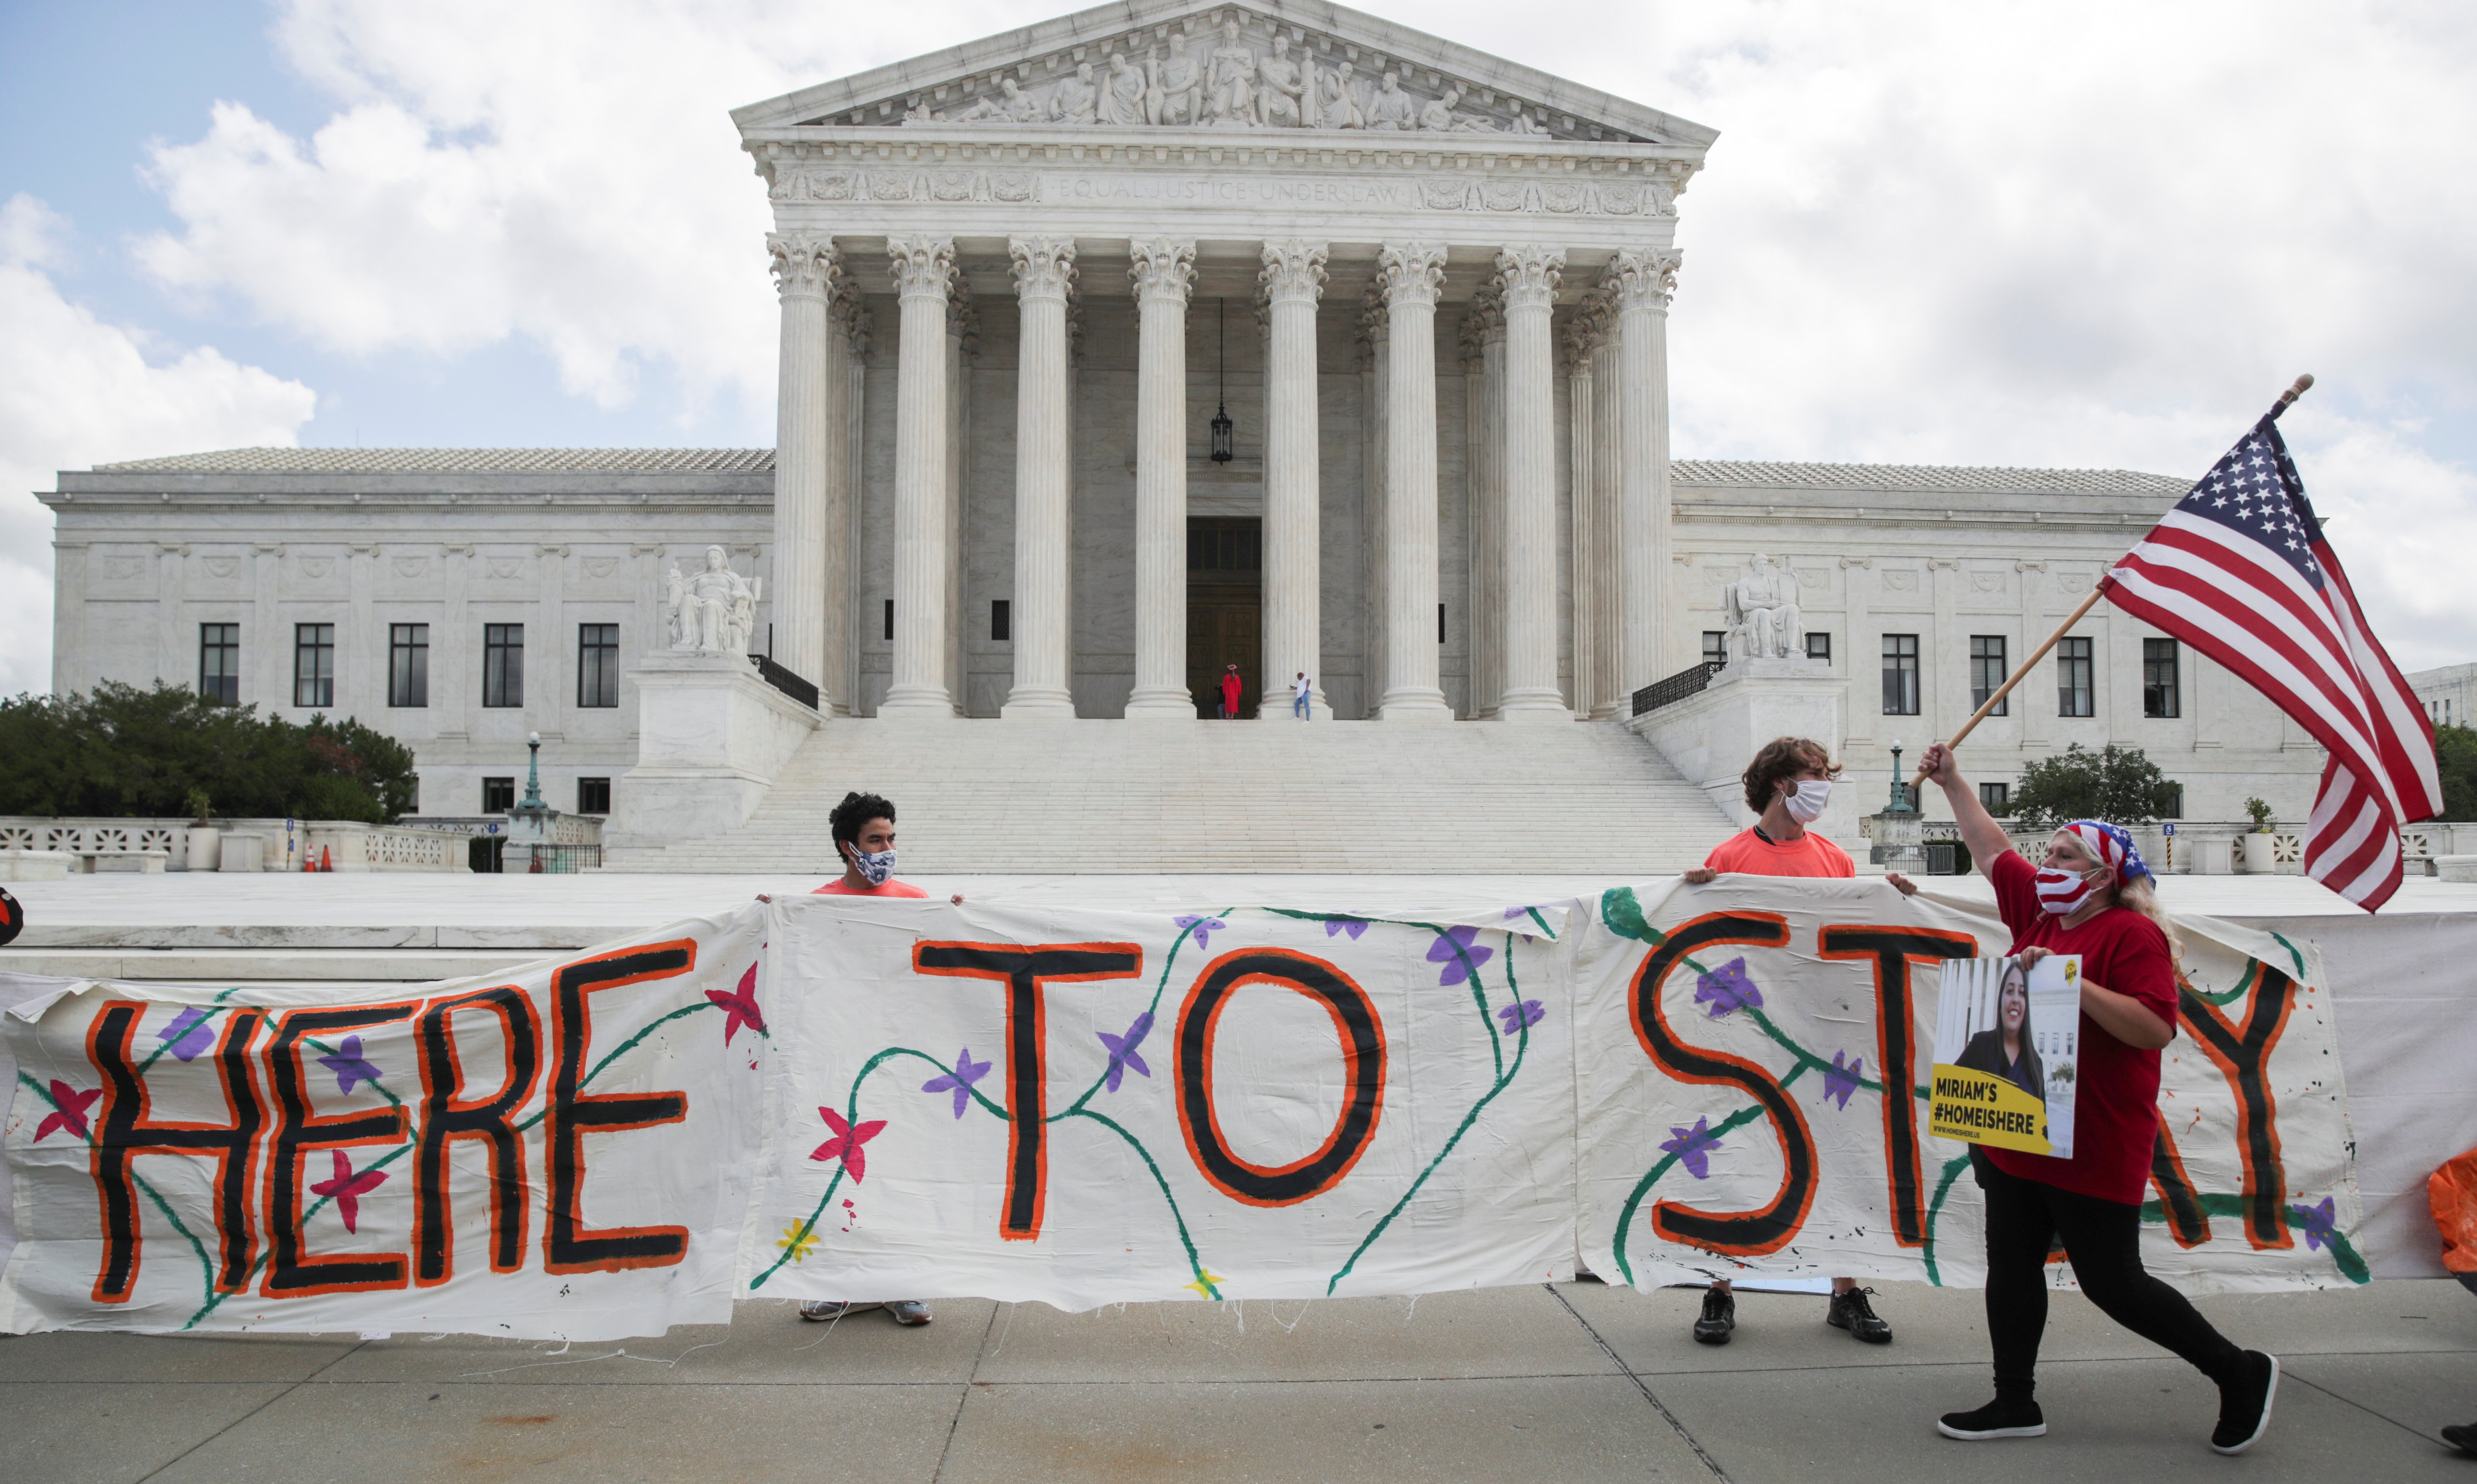 Beneficiaries of the Deferred Action for Childhood Arrivals program and their supporters celebrate outside the U.S. Supreme Court in Washington June 18, 2020, after the high court upheld DACA in a challenge brought by the Trump administration. Judge Andre